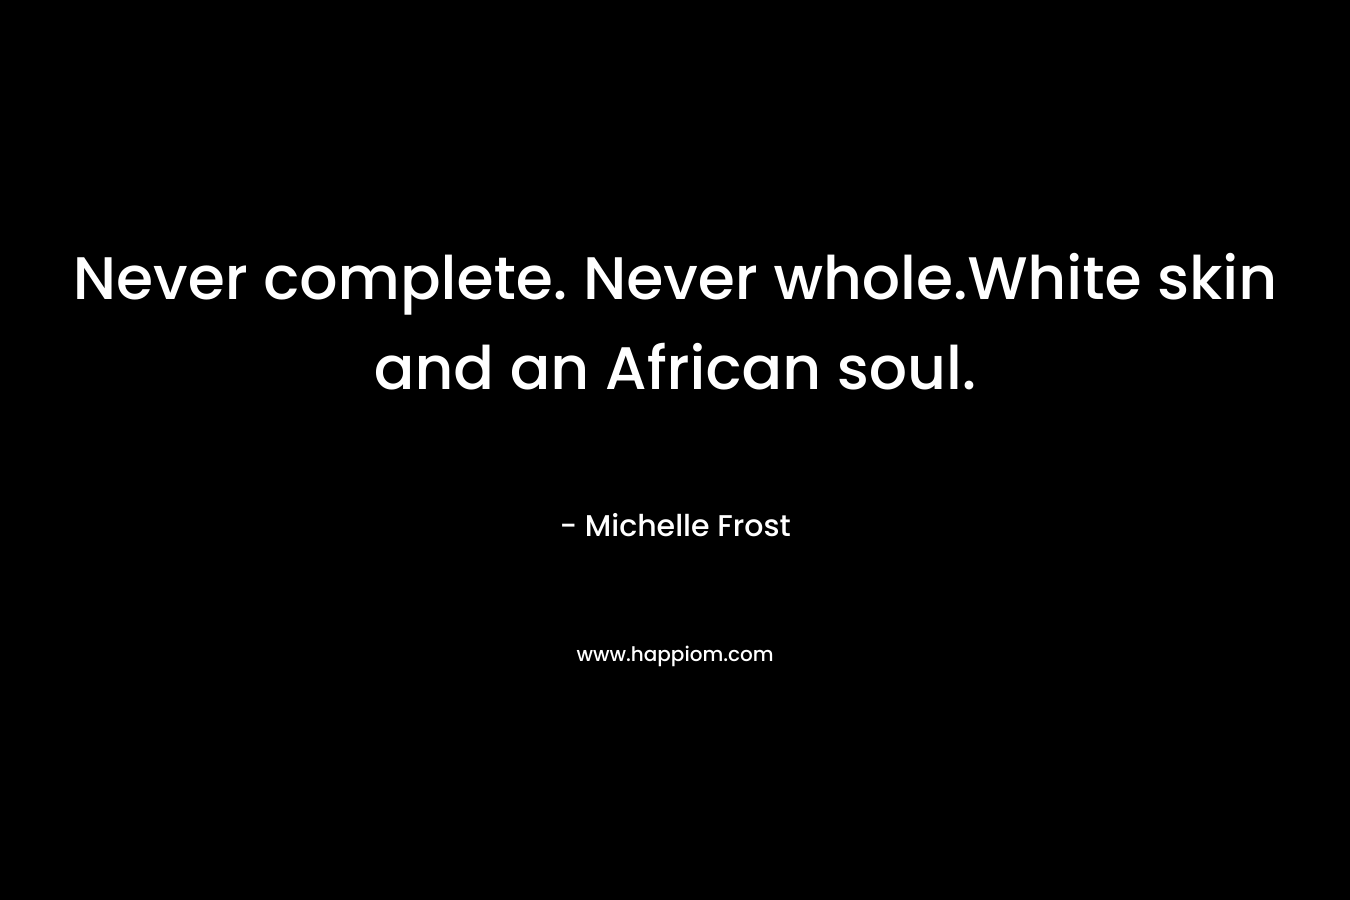 Never complete. Never whole.White skin and an African soul.